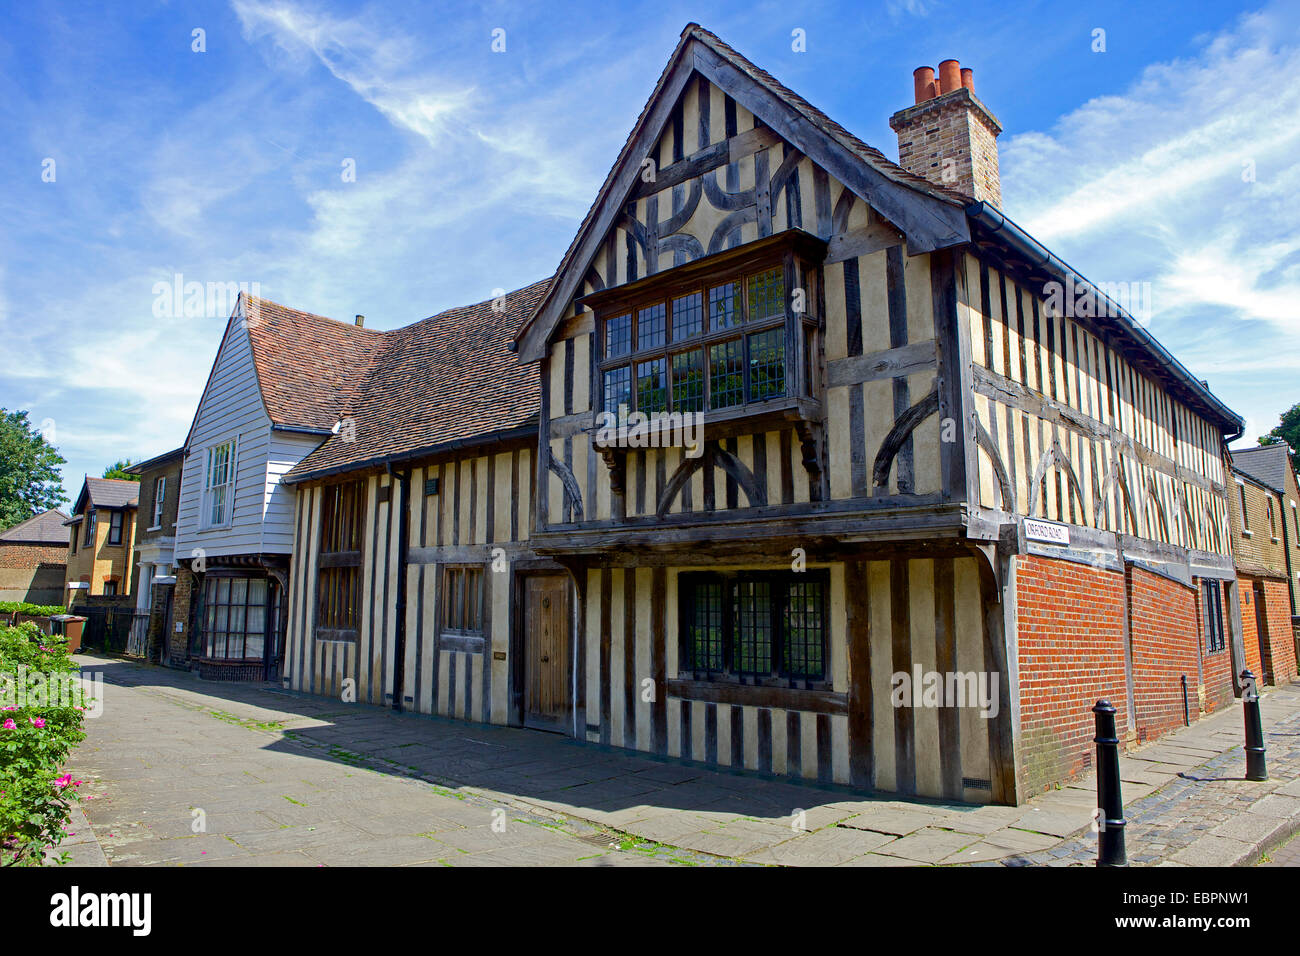 The Ancient House in Walthamstow Village, Walthamstow, East London, England, United Kingdom, Europe Stock Photo